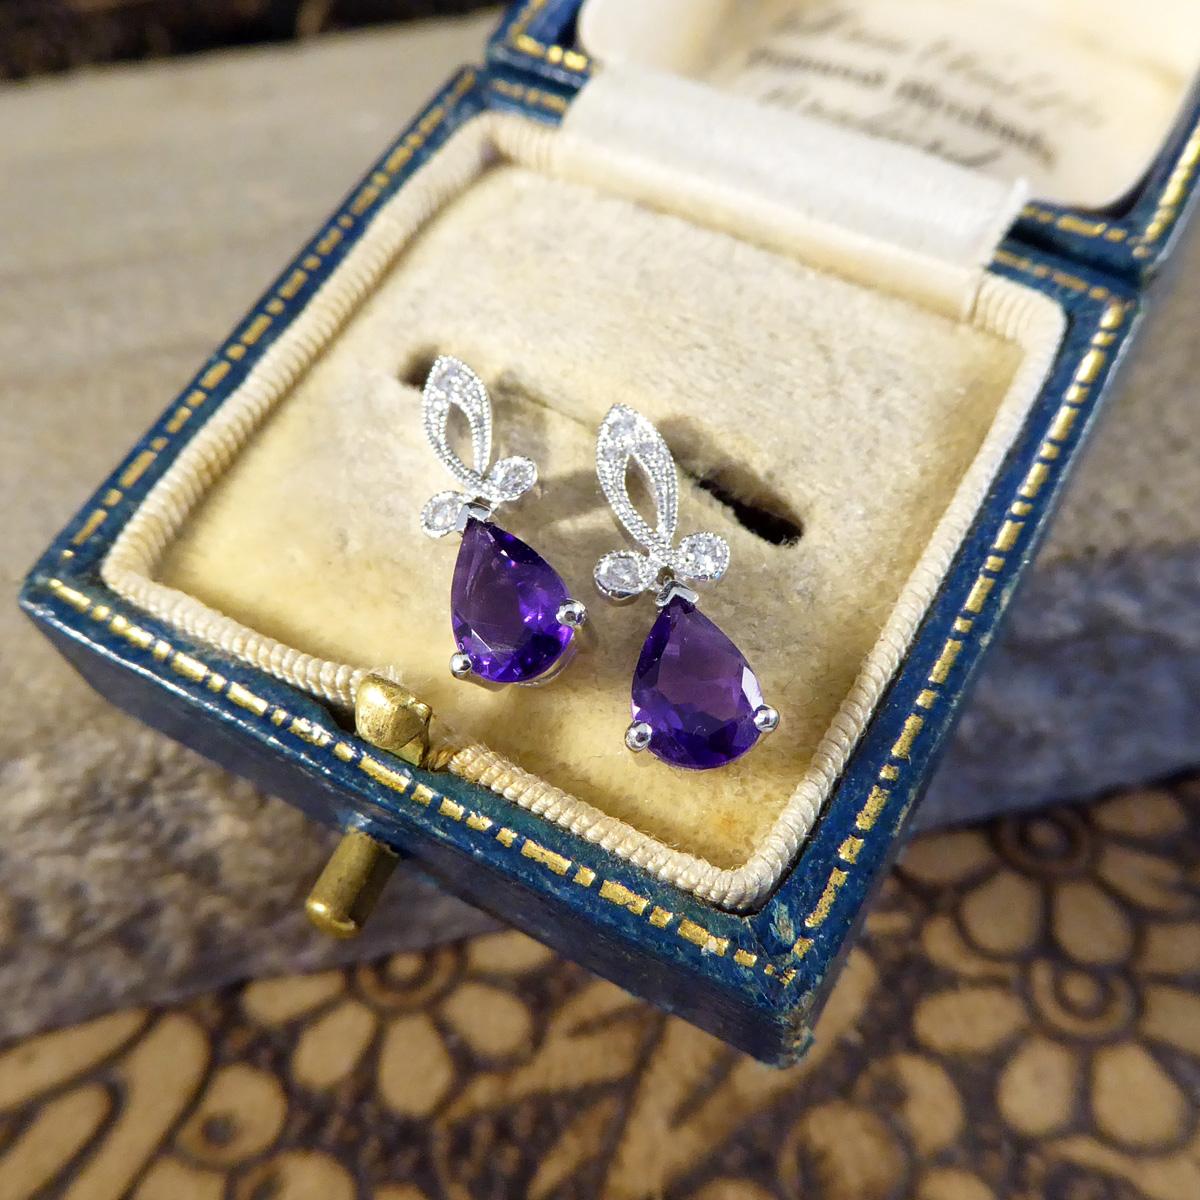 Art Deco Inspired Pear Shaped Amethyst Drop Earrings with Diamonds in 18ct White In New Condition For Sale In Yorkshire, West Yorkshire